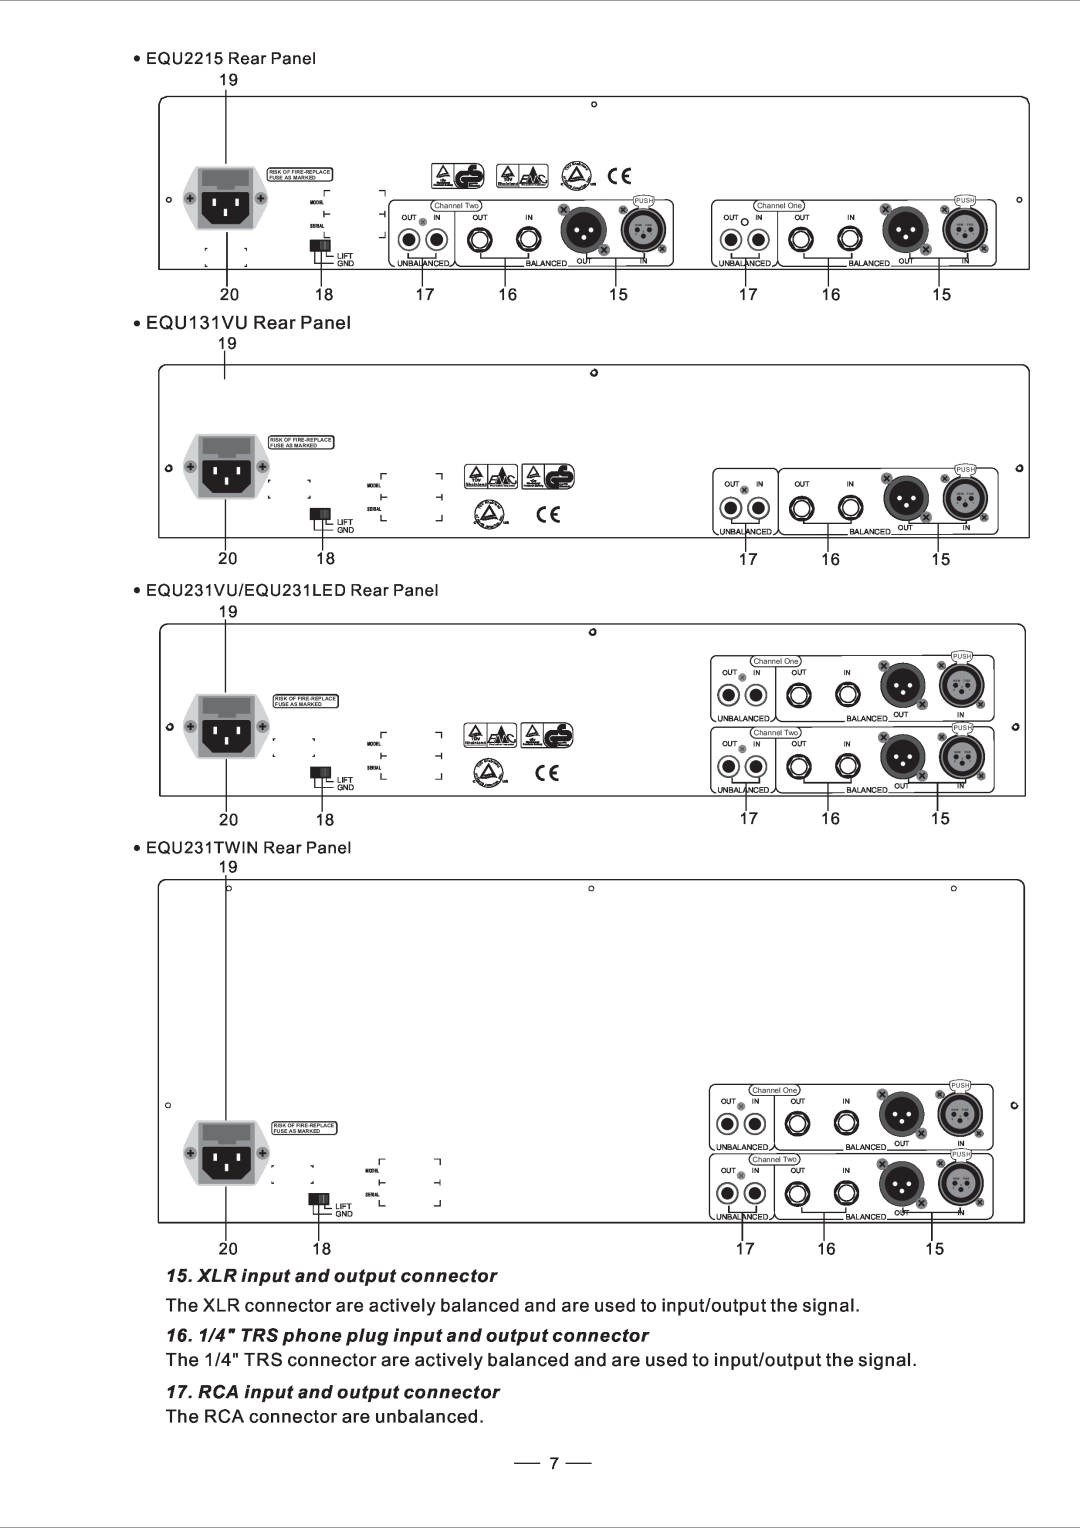 Nilfisk-ALTO EQU user manual XLR input and output connector, 16. 1/4 TRS phone plug input and output connector 